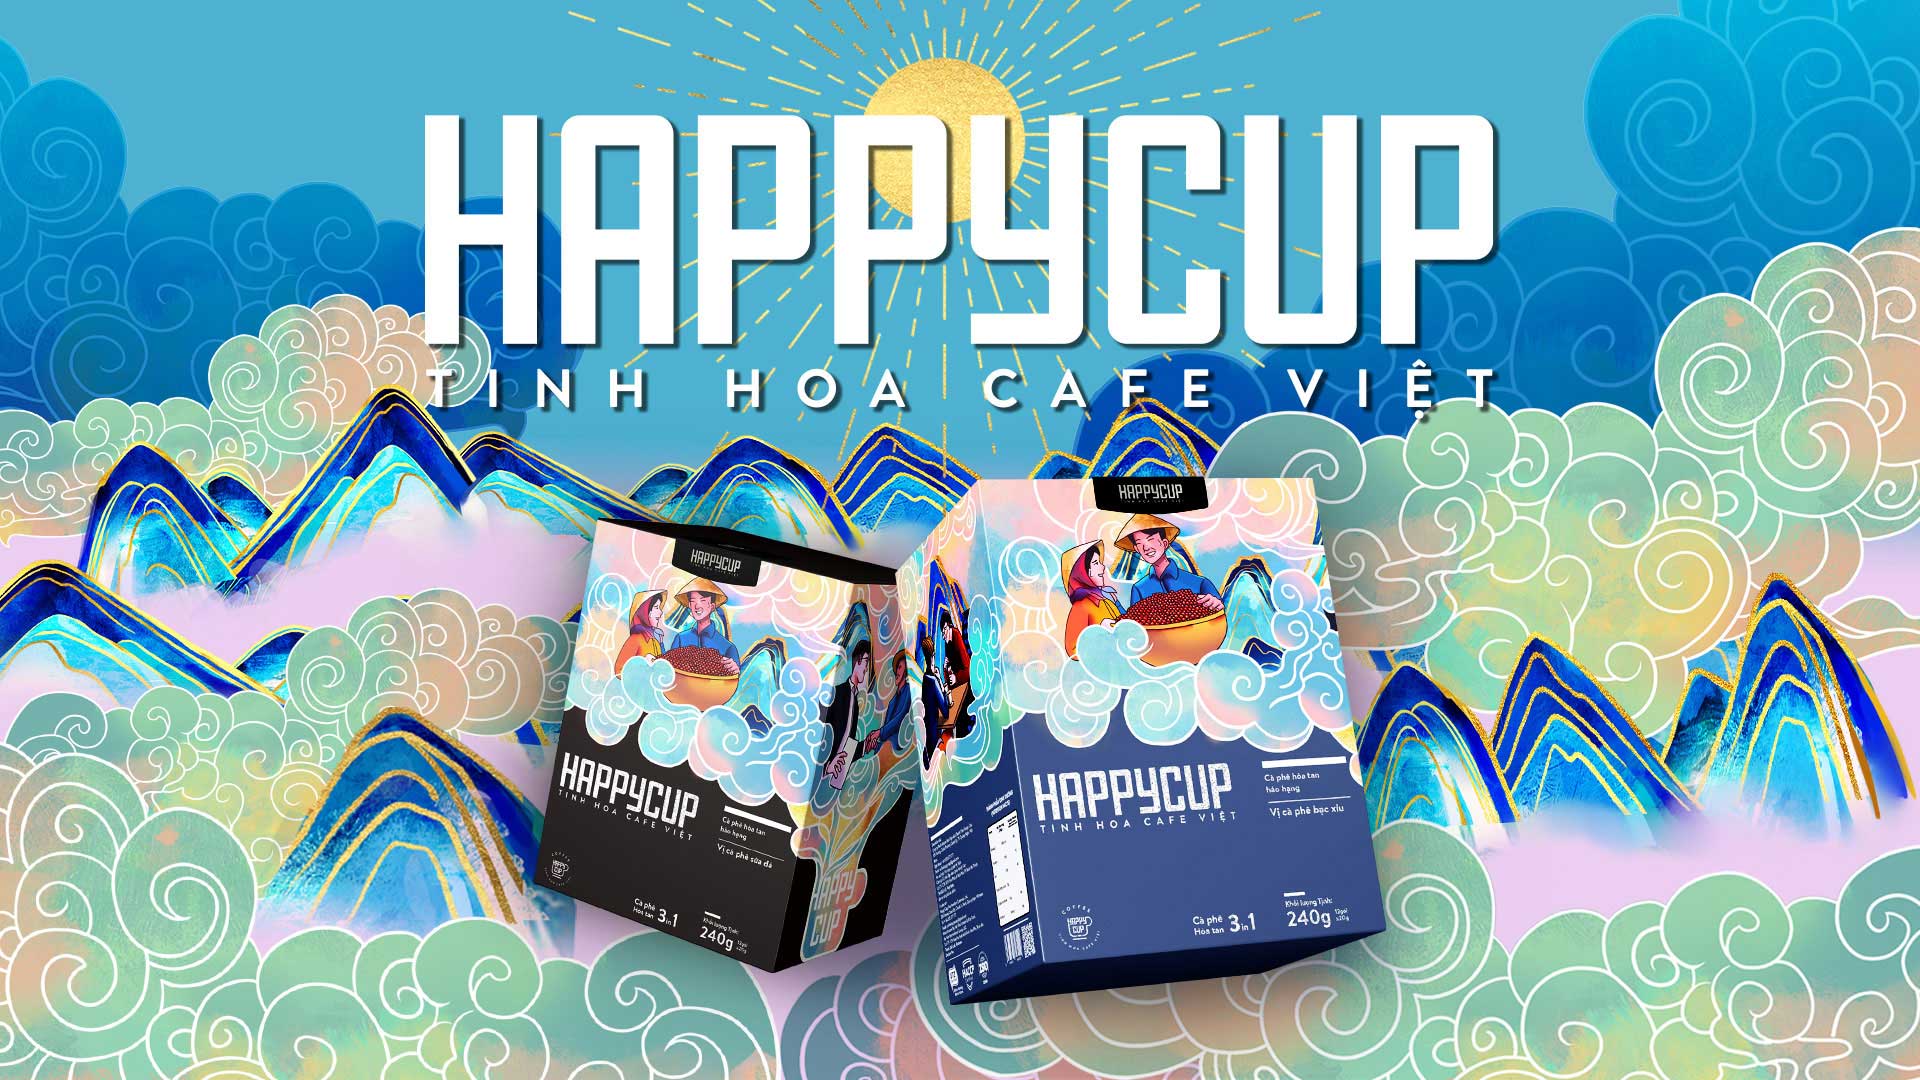 Design Agency Blue.Lab Explories Coffee Genealogy: Unveiling Stories with Happy Cup Coffee